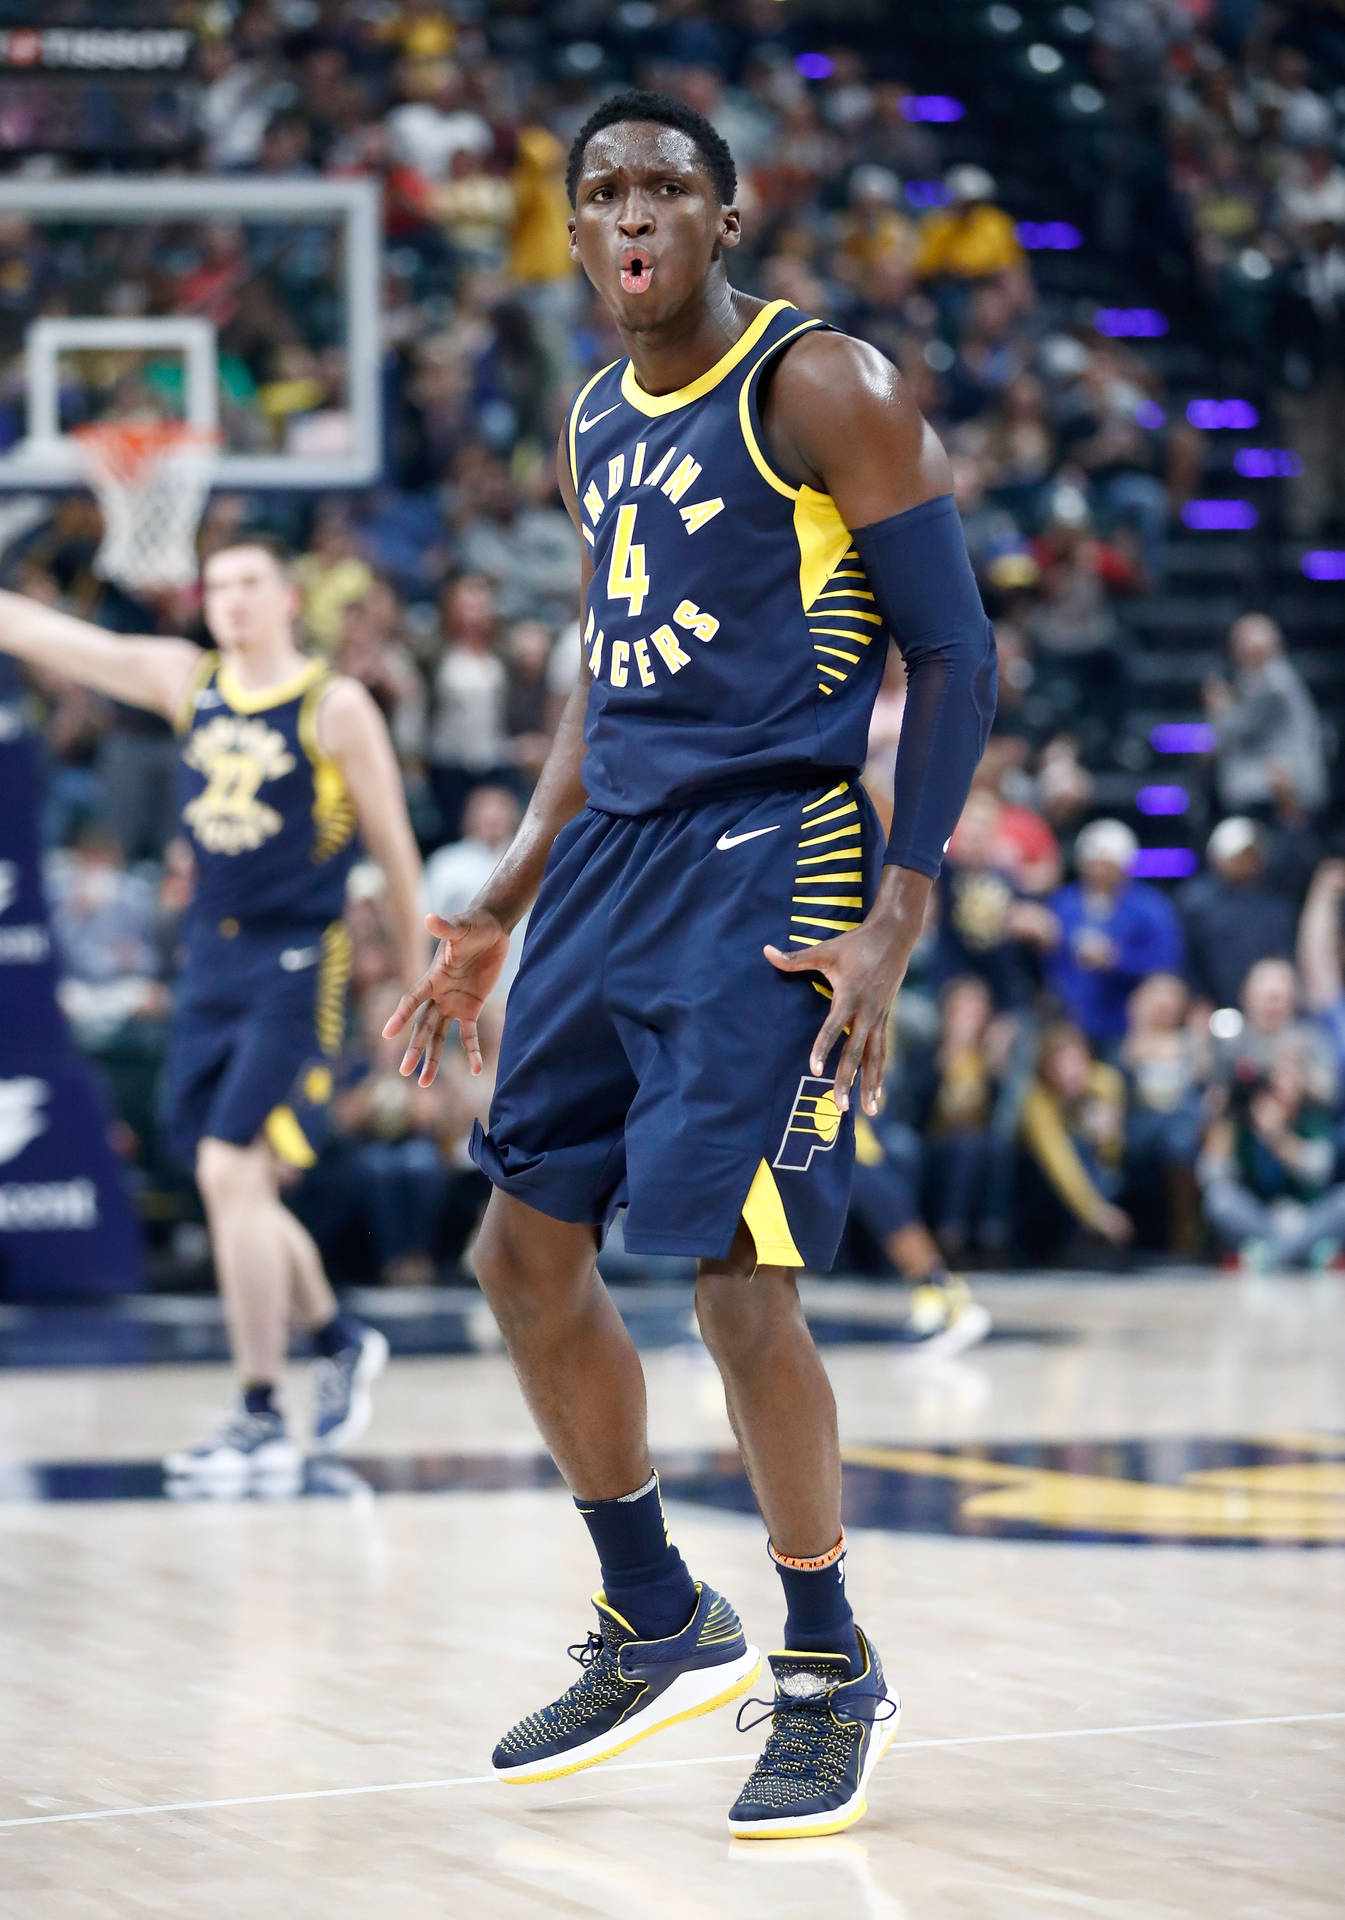 Solomon Hill has arrived for the Indiana Pacers - Arizona Desert Swarm